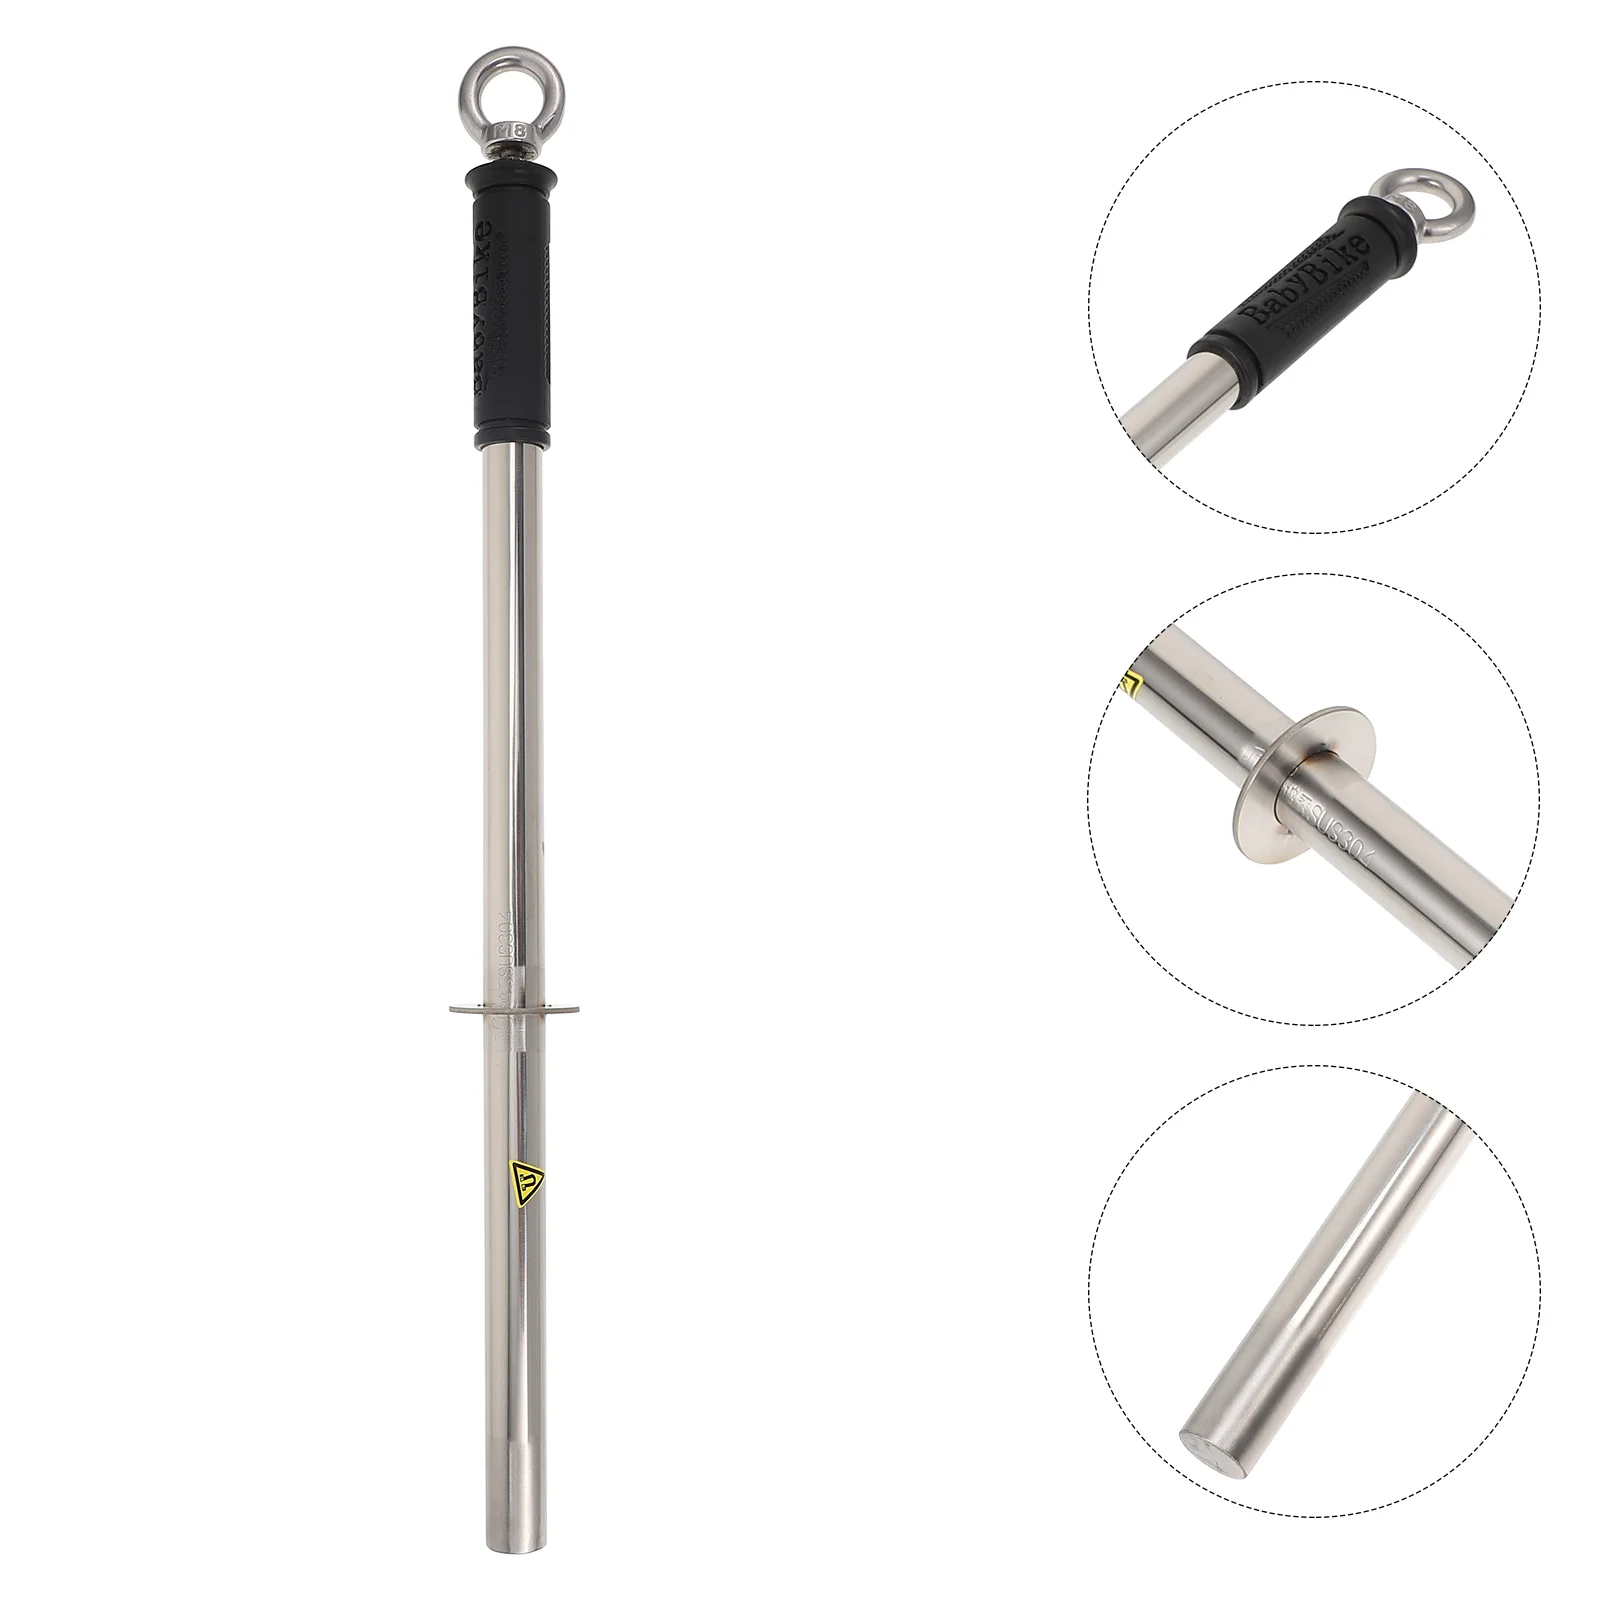 

Tool Magnet Pickup Nail Swarf Retrieving Telescoping Iron Up Sweeper Telescopic Pick Absorber Collector Rod Stick Extendable Bar